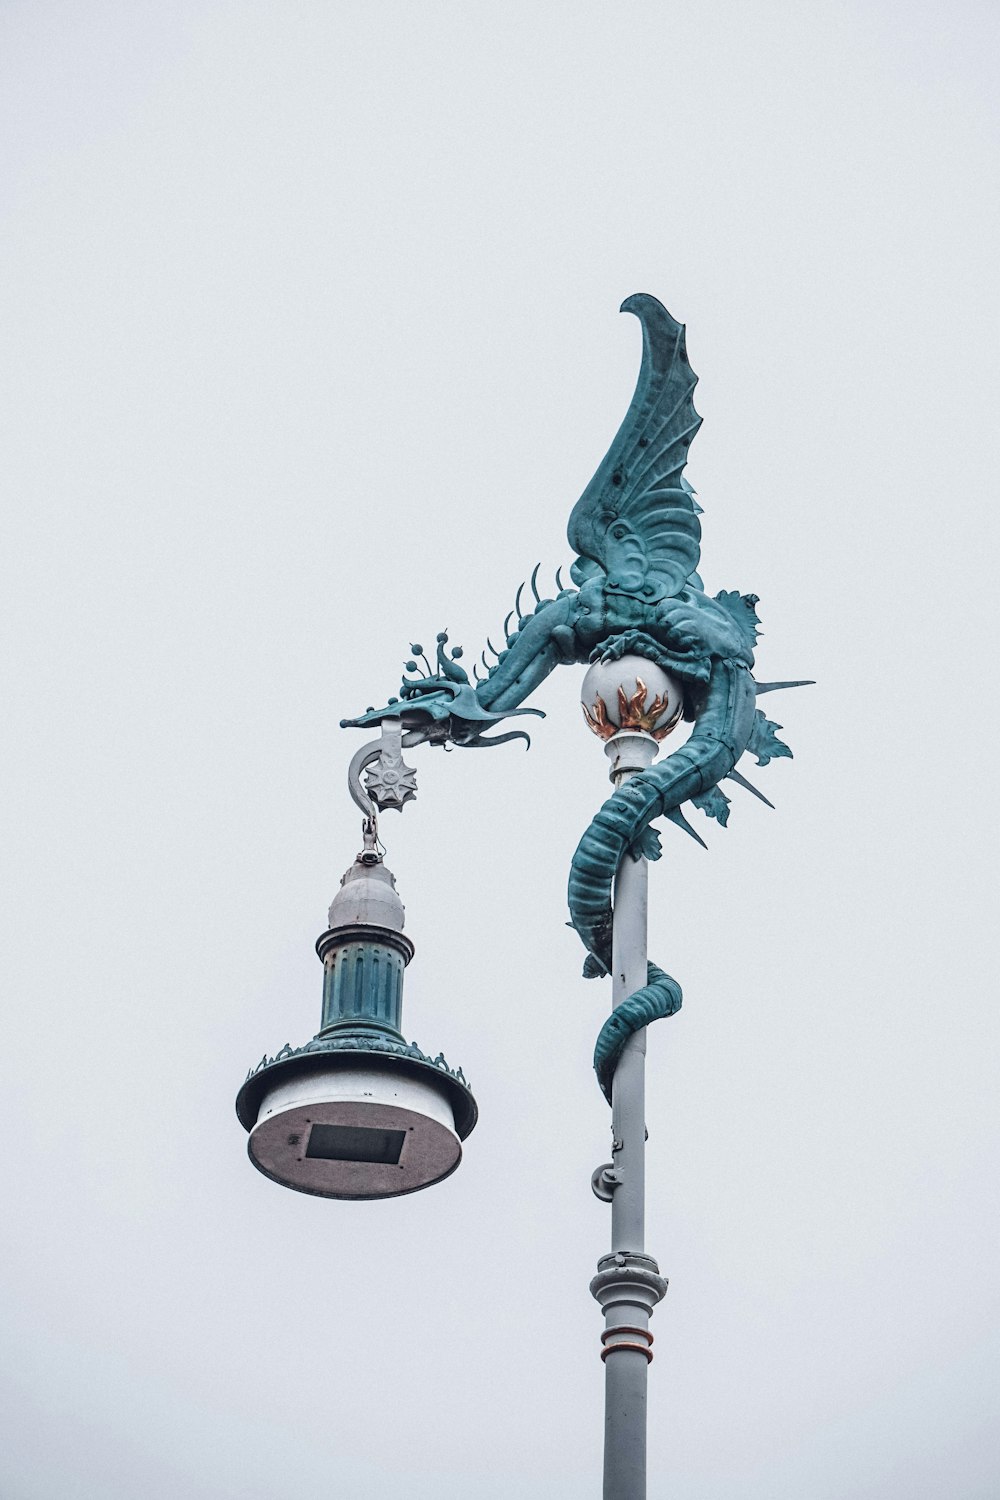 a dragon statue on top of a street light